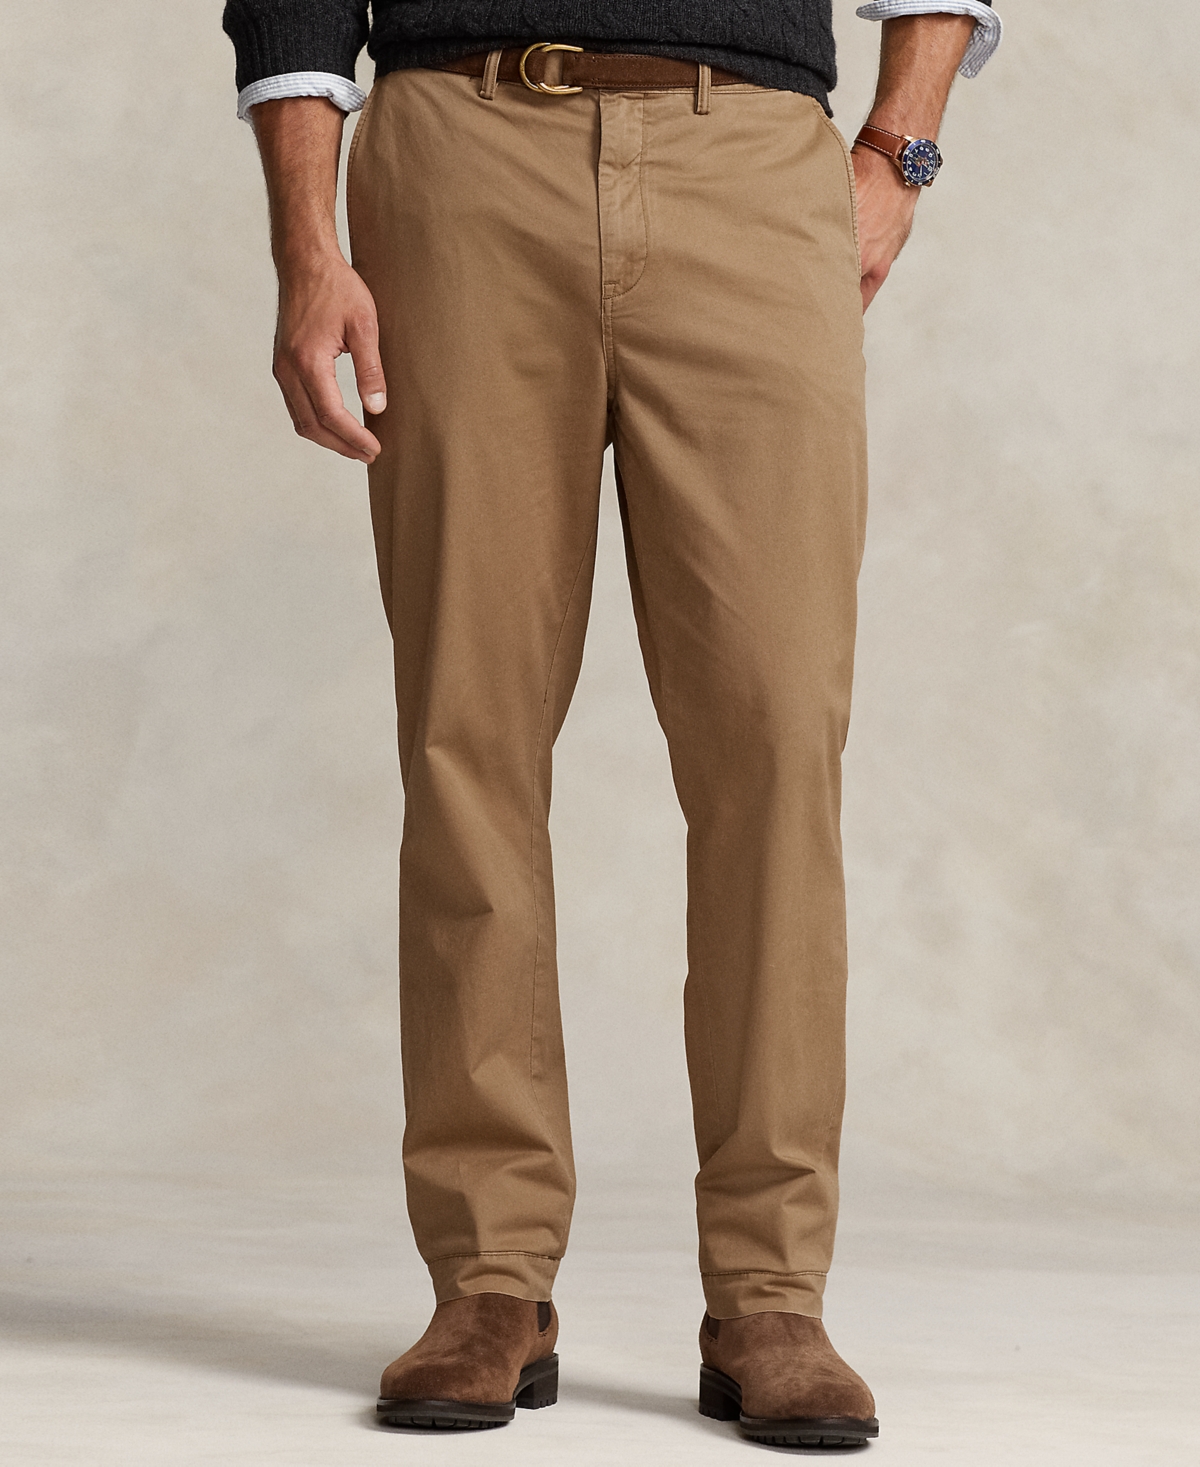 Polo Ralph Lauren Men's Big & Tall Stretch Classic Fit Chino Pants In Rustic Tan